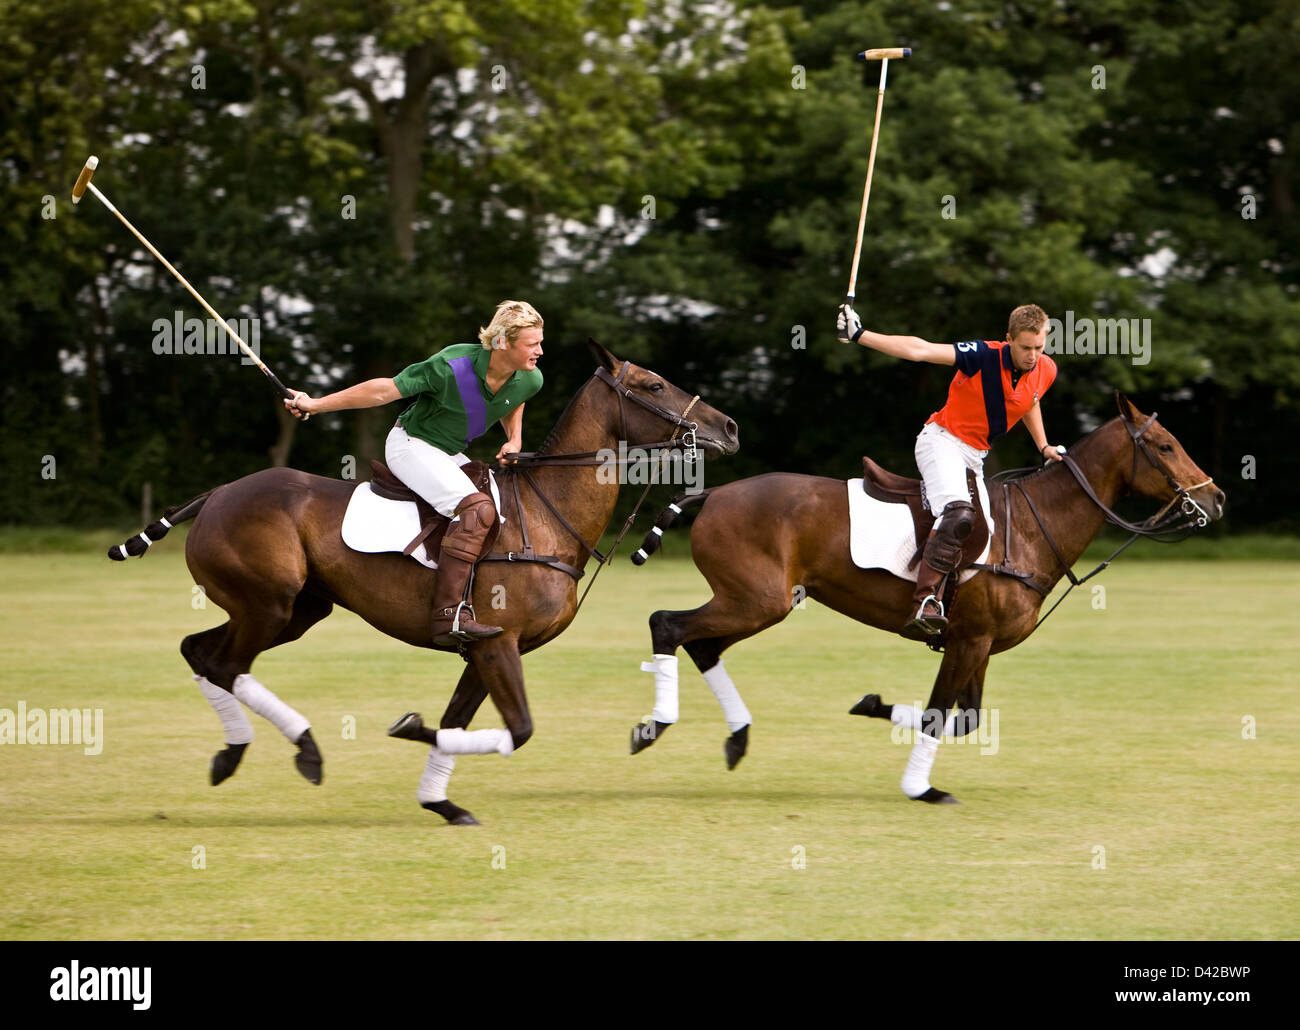 Polo players on horseback in rivalry for the ball Stock Photo